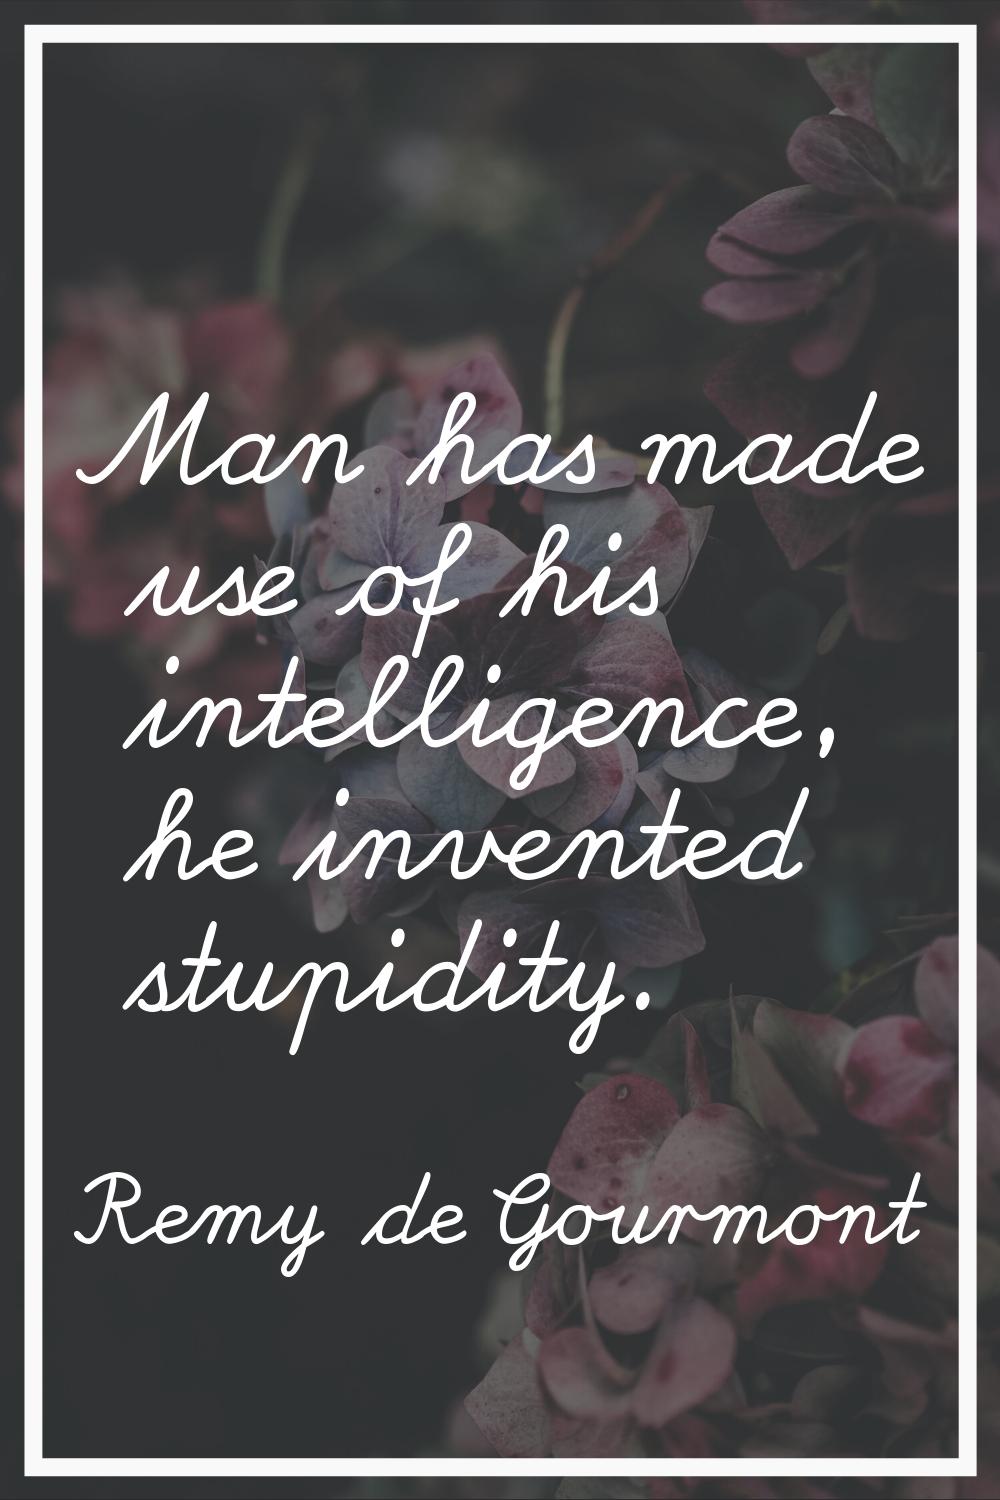 Man has made use of his intelligence, he invented stupidity.